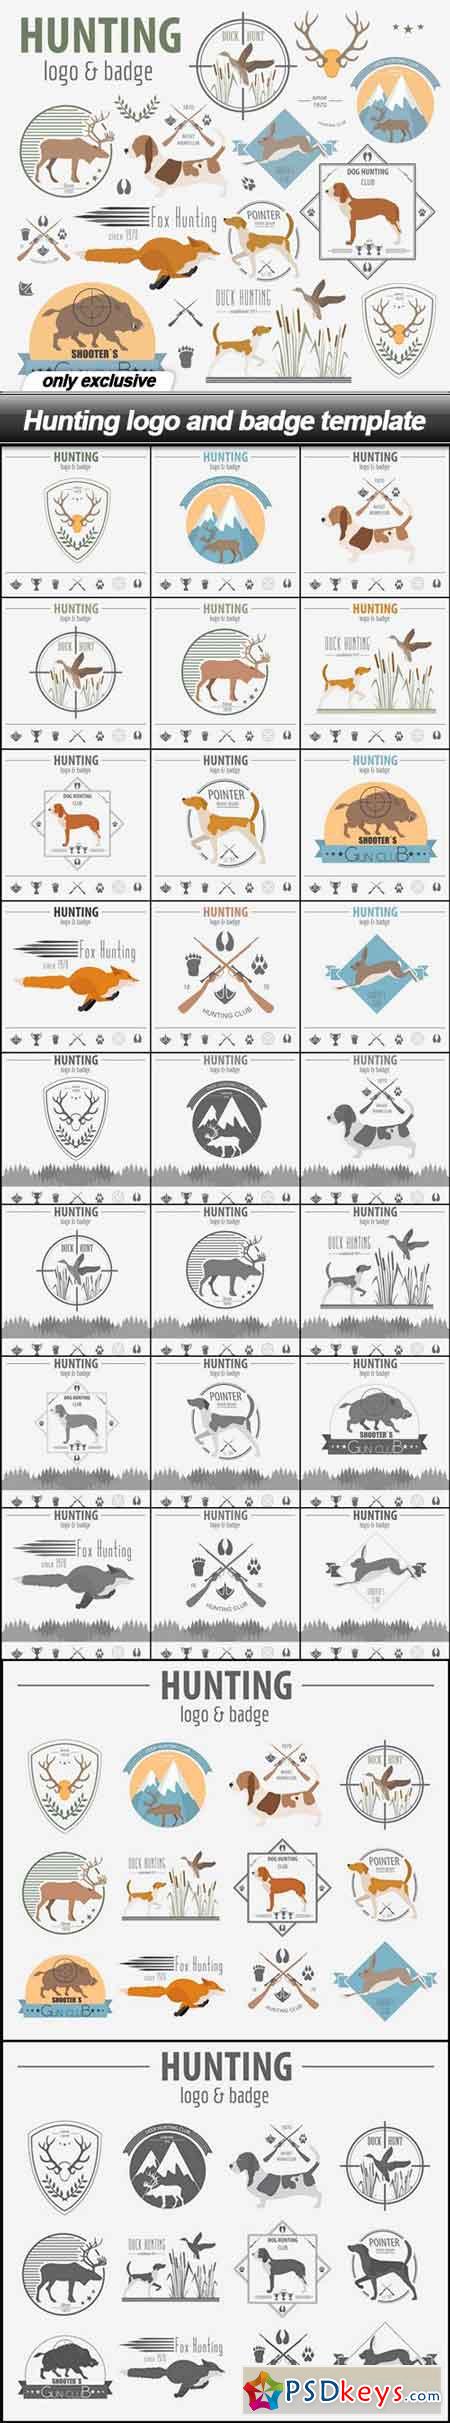 Hunting logo and badge template - 27 EPS